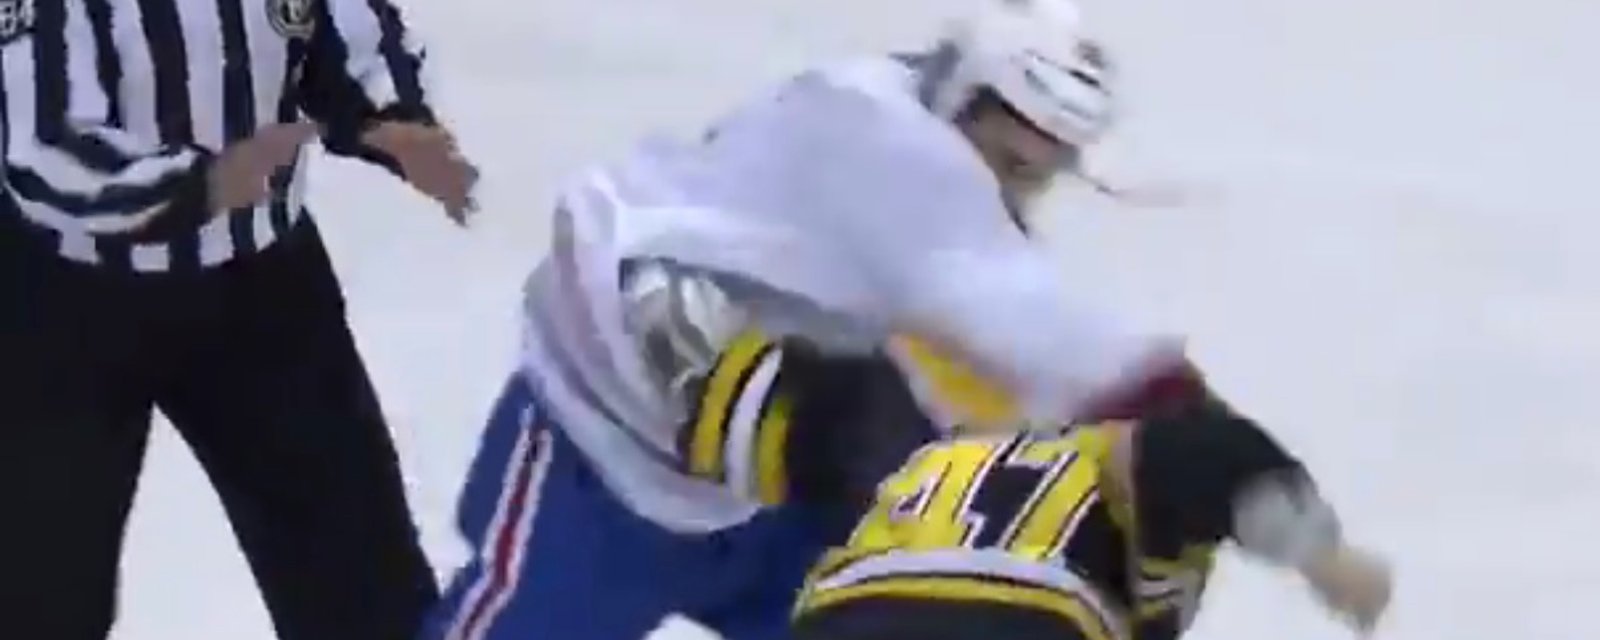 Video: Krug and Shaw settle old score with brutal haymakers.